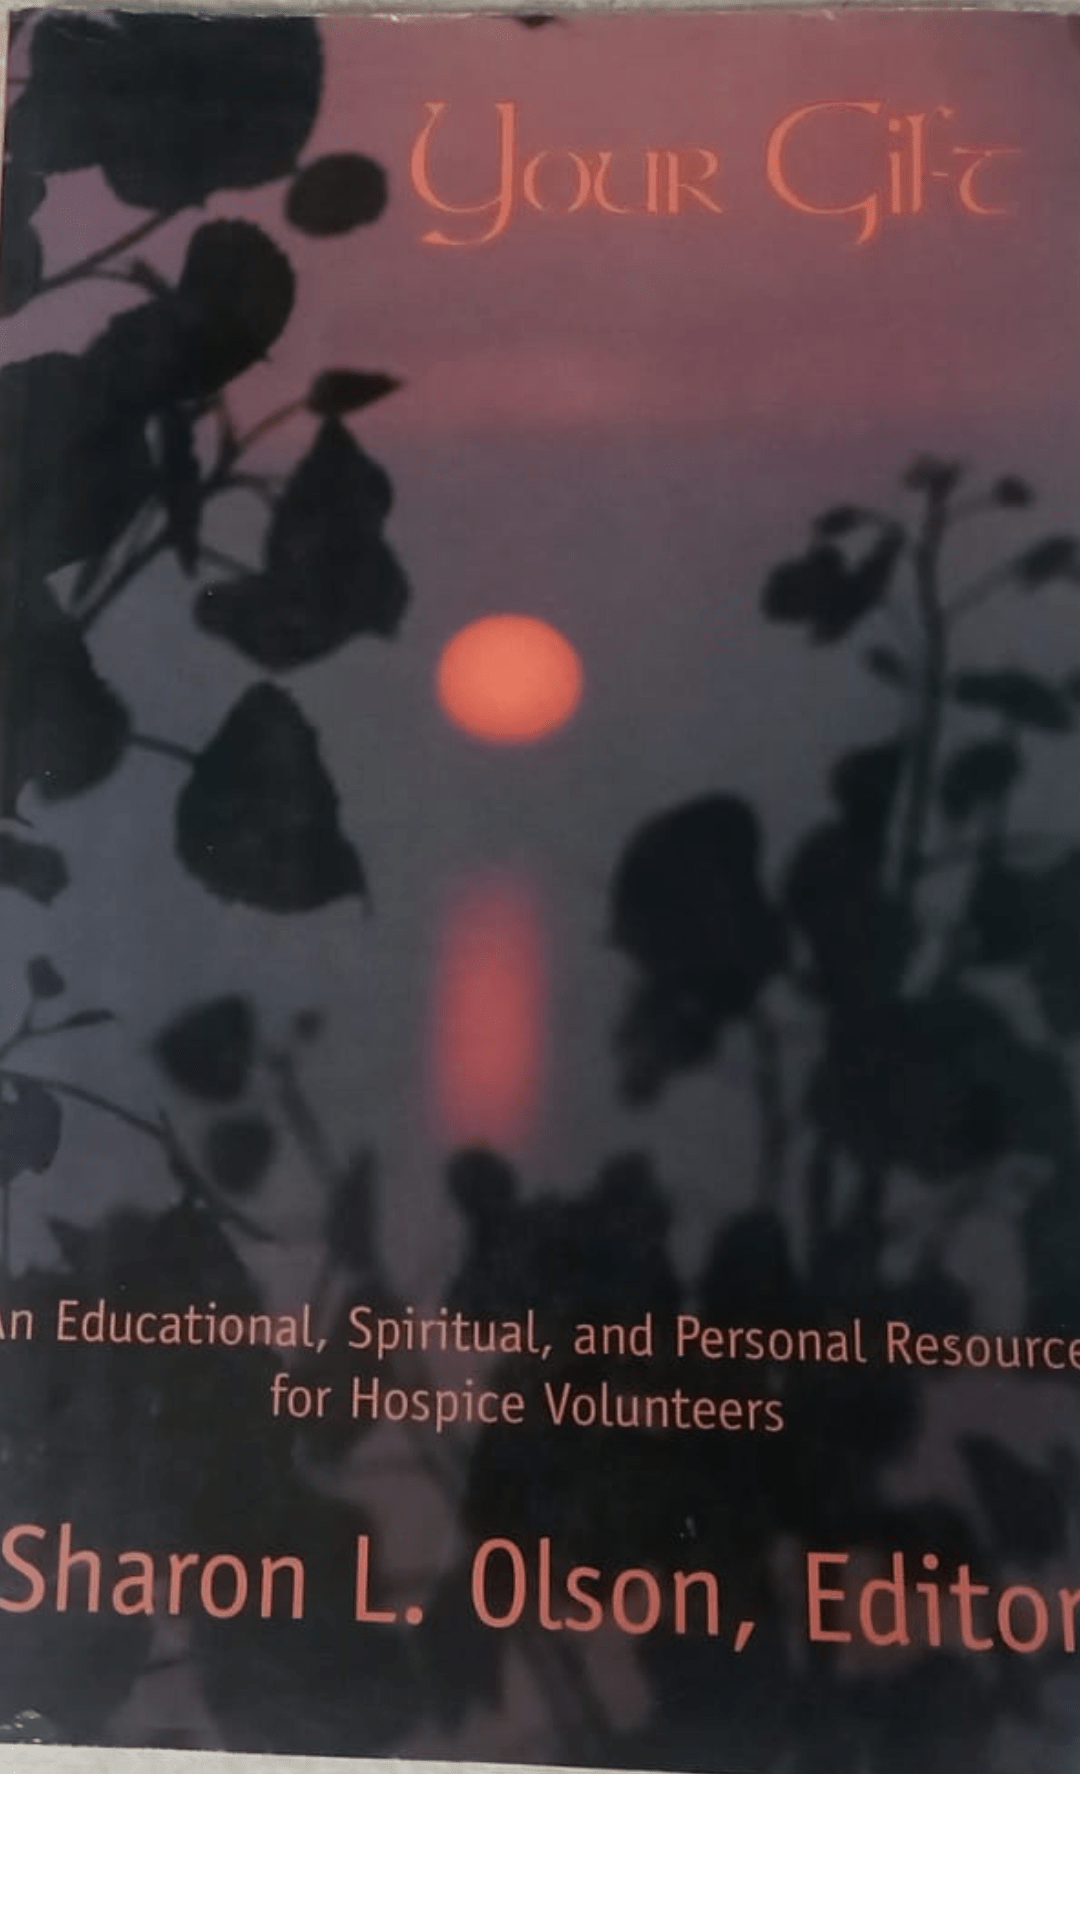 Your Gift: An Educational, Spiritual, and Personal Resource for Hospice Volunteers